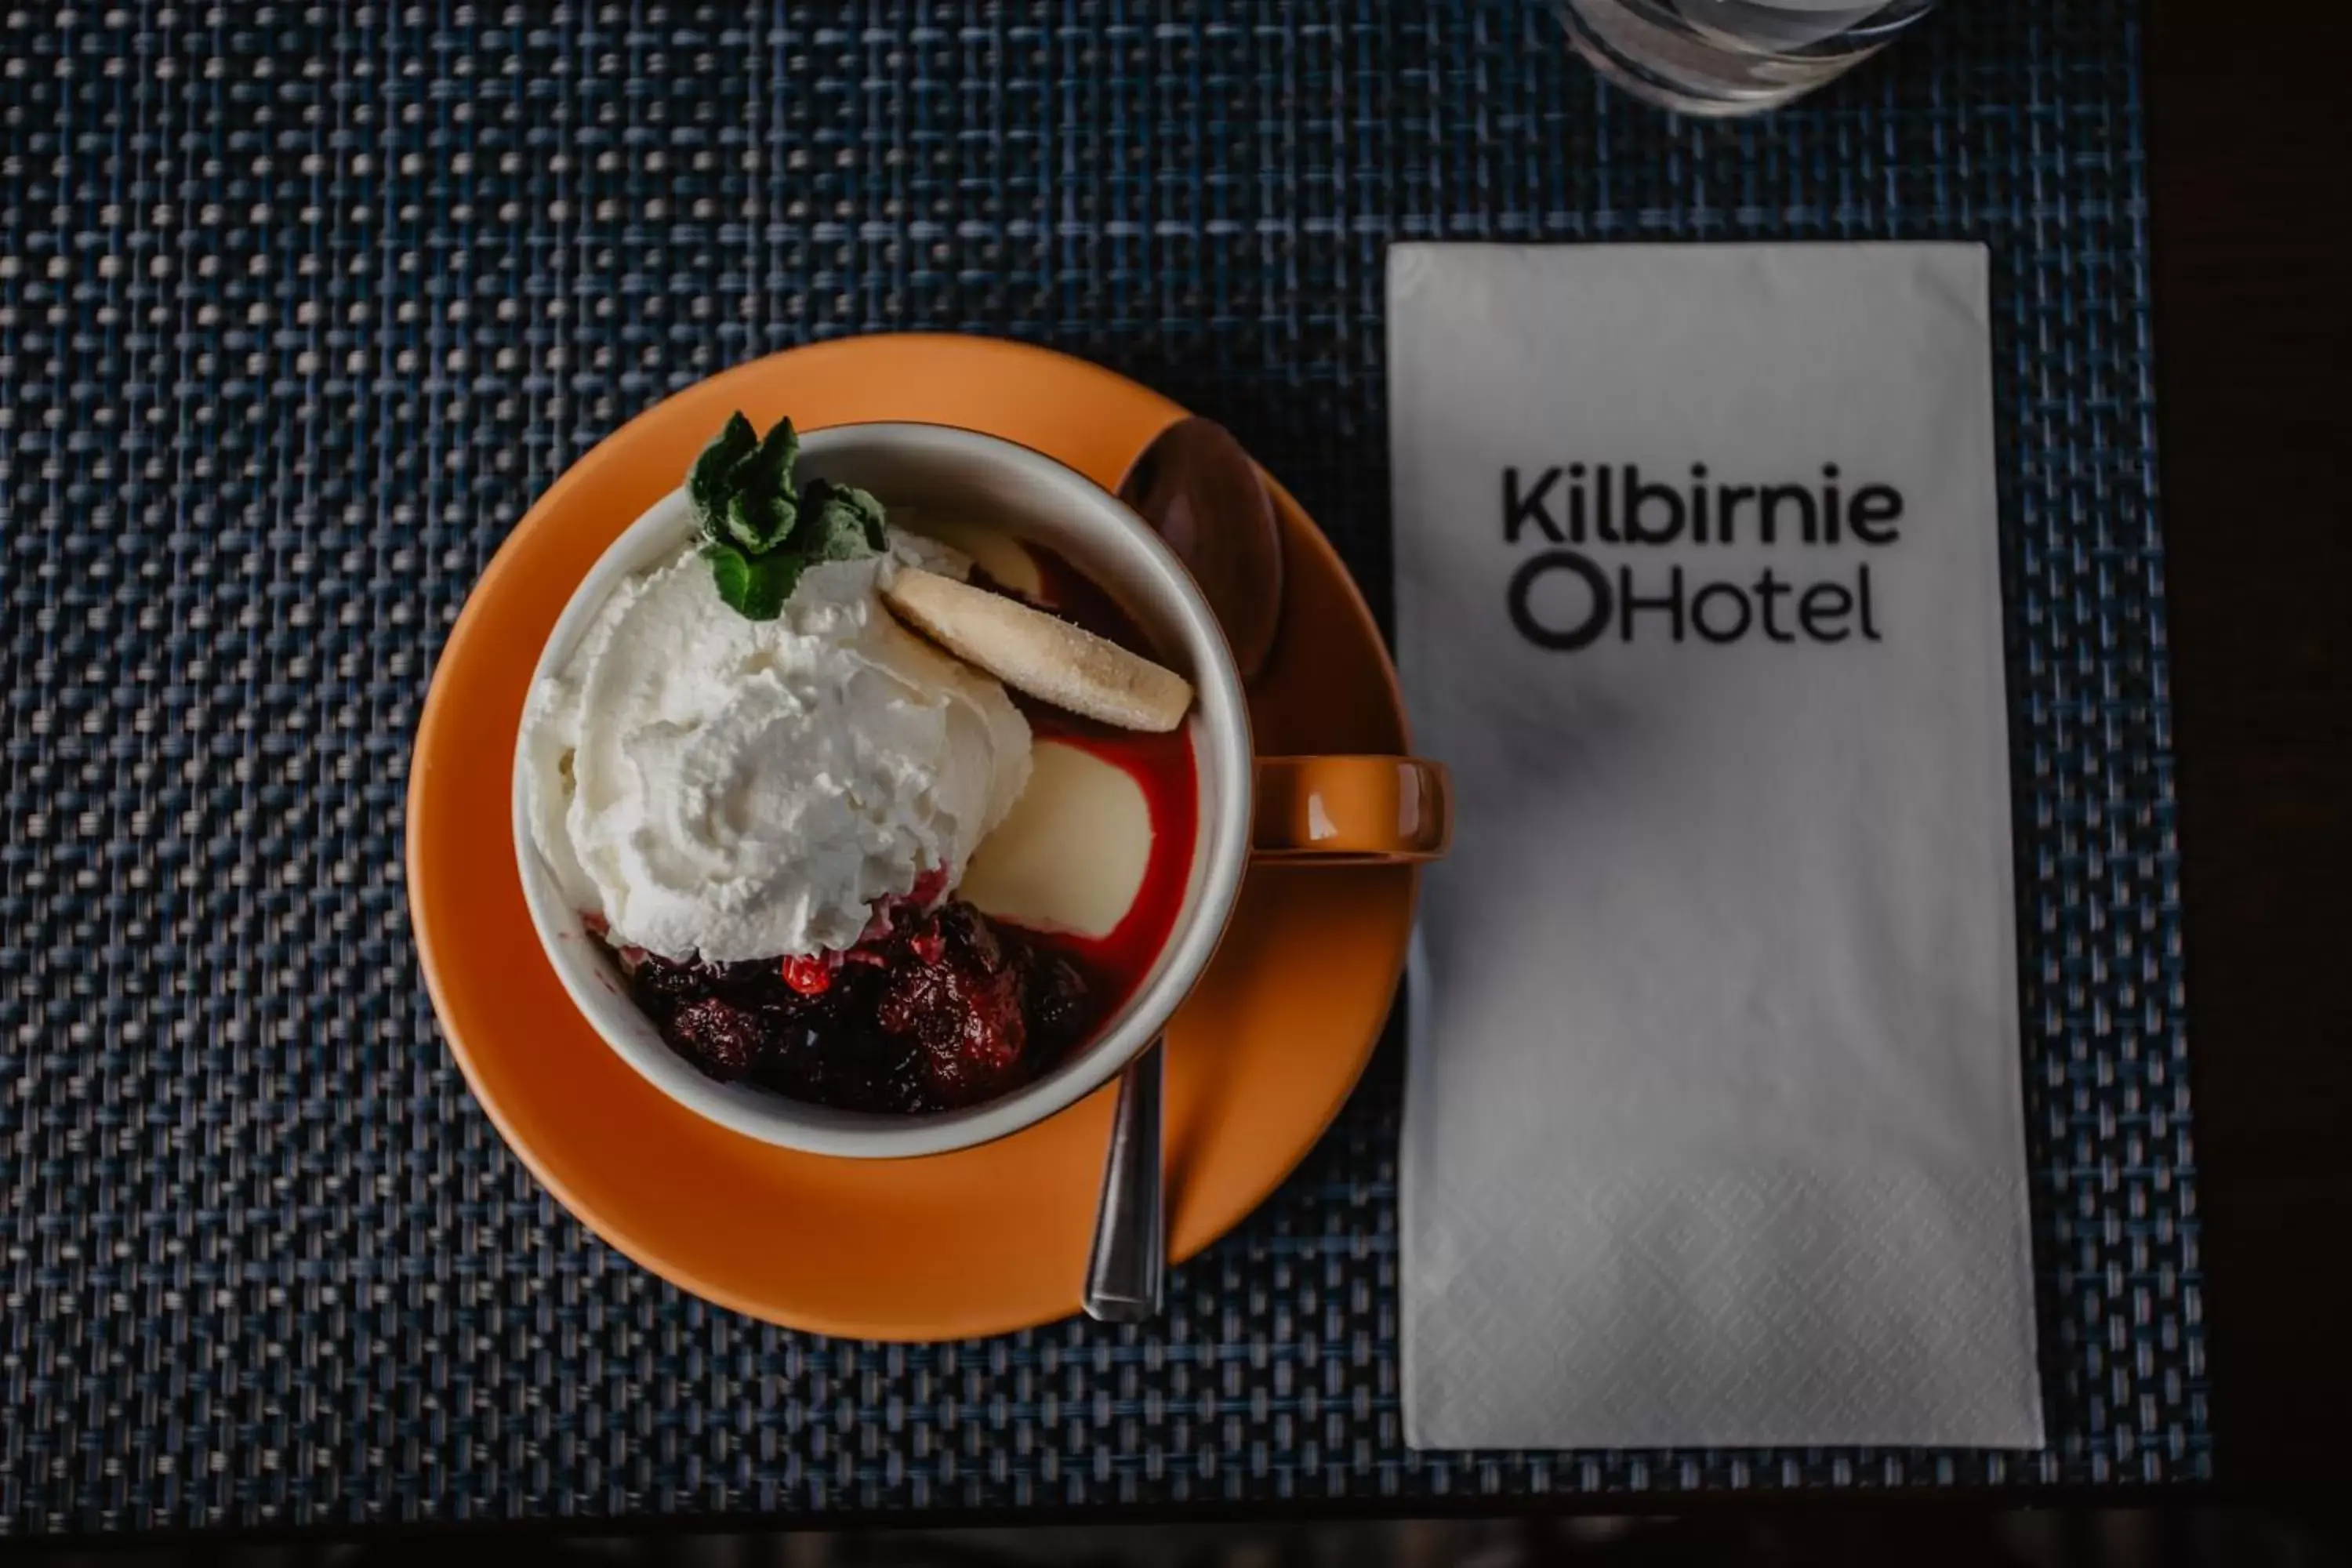 Food and drinks in The Kilbirnie Hotel